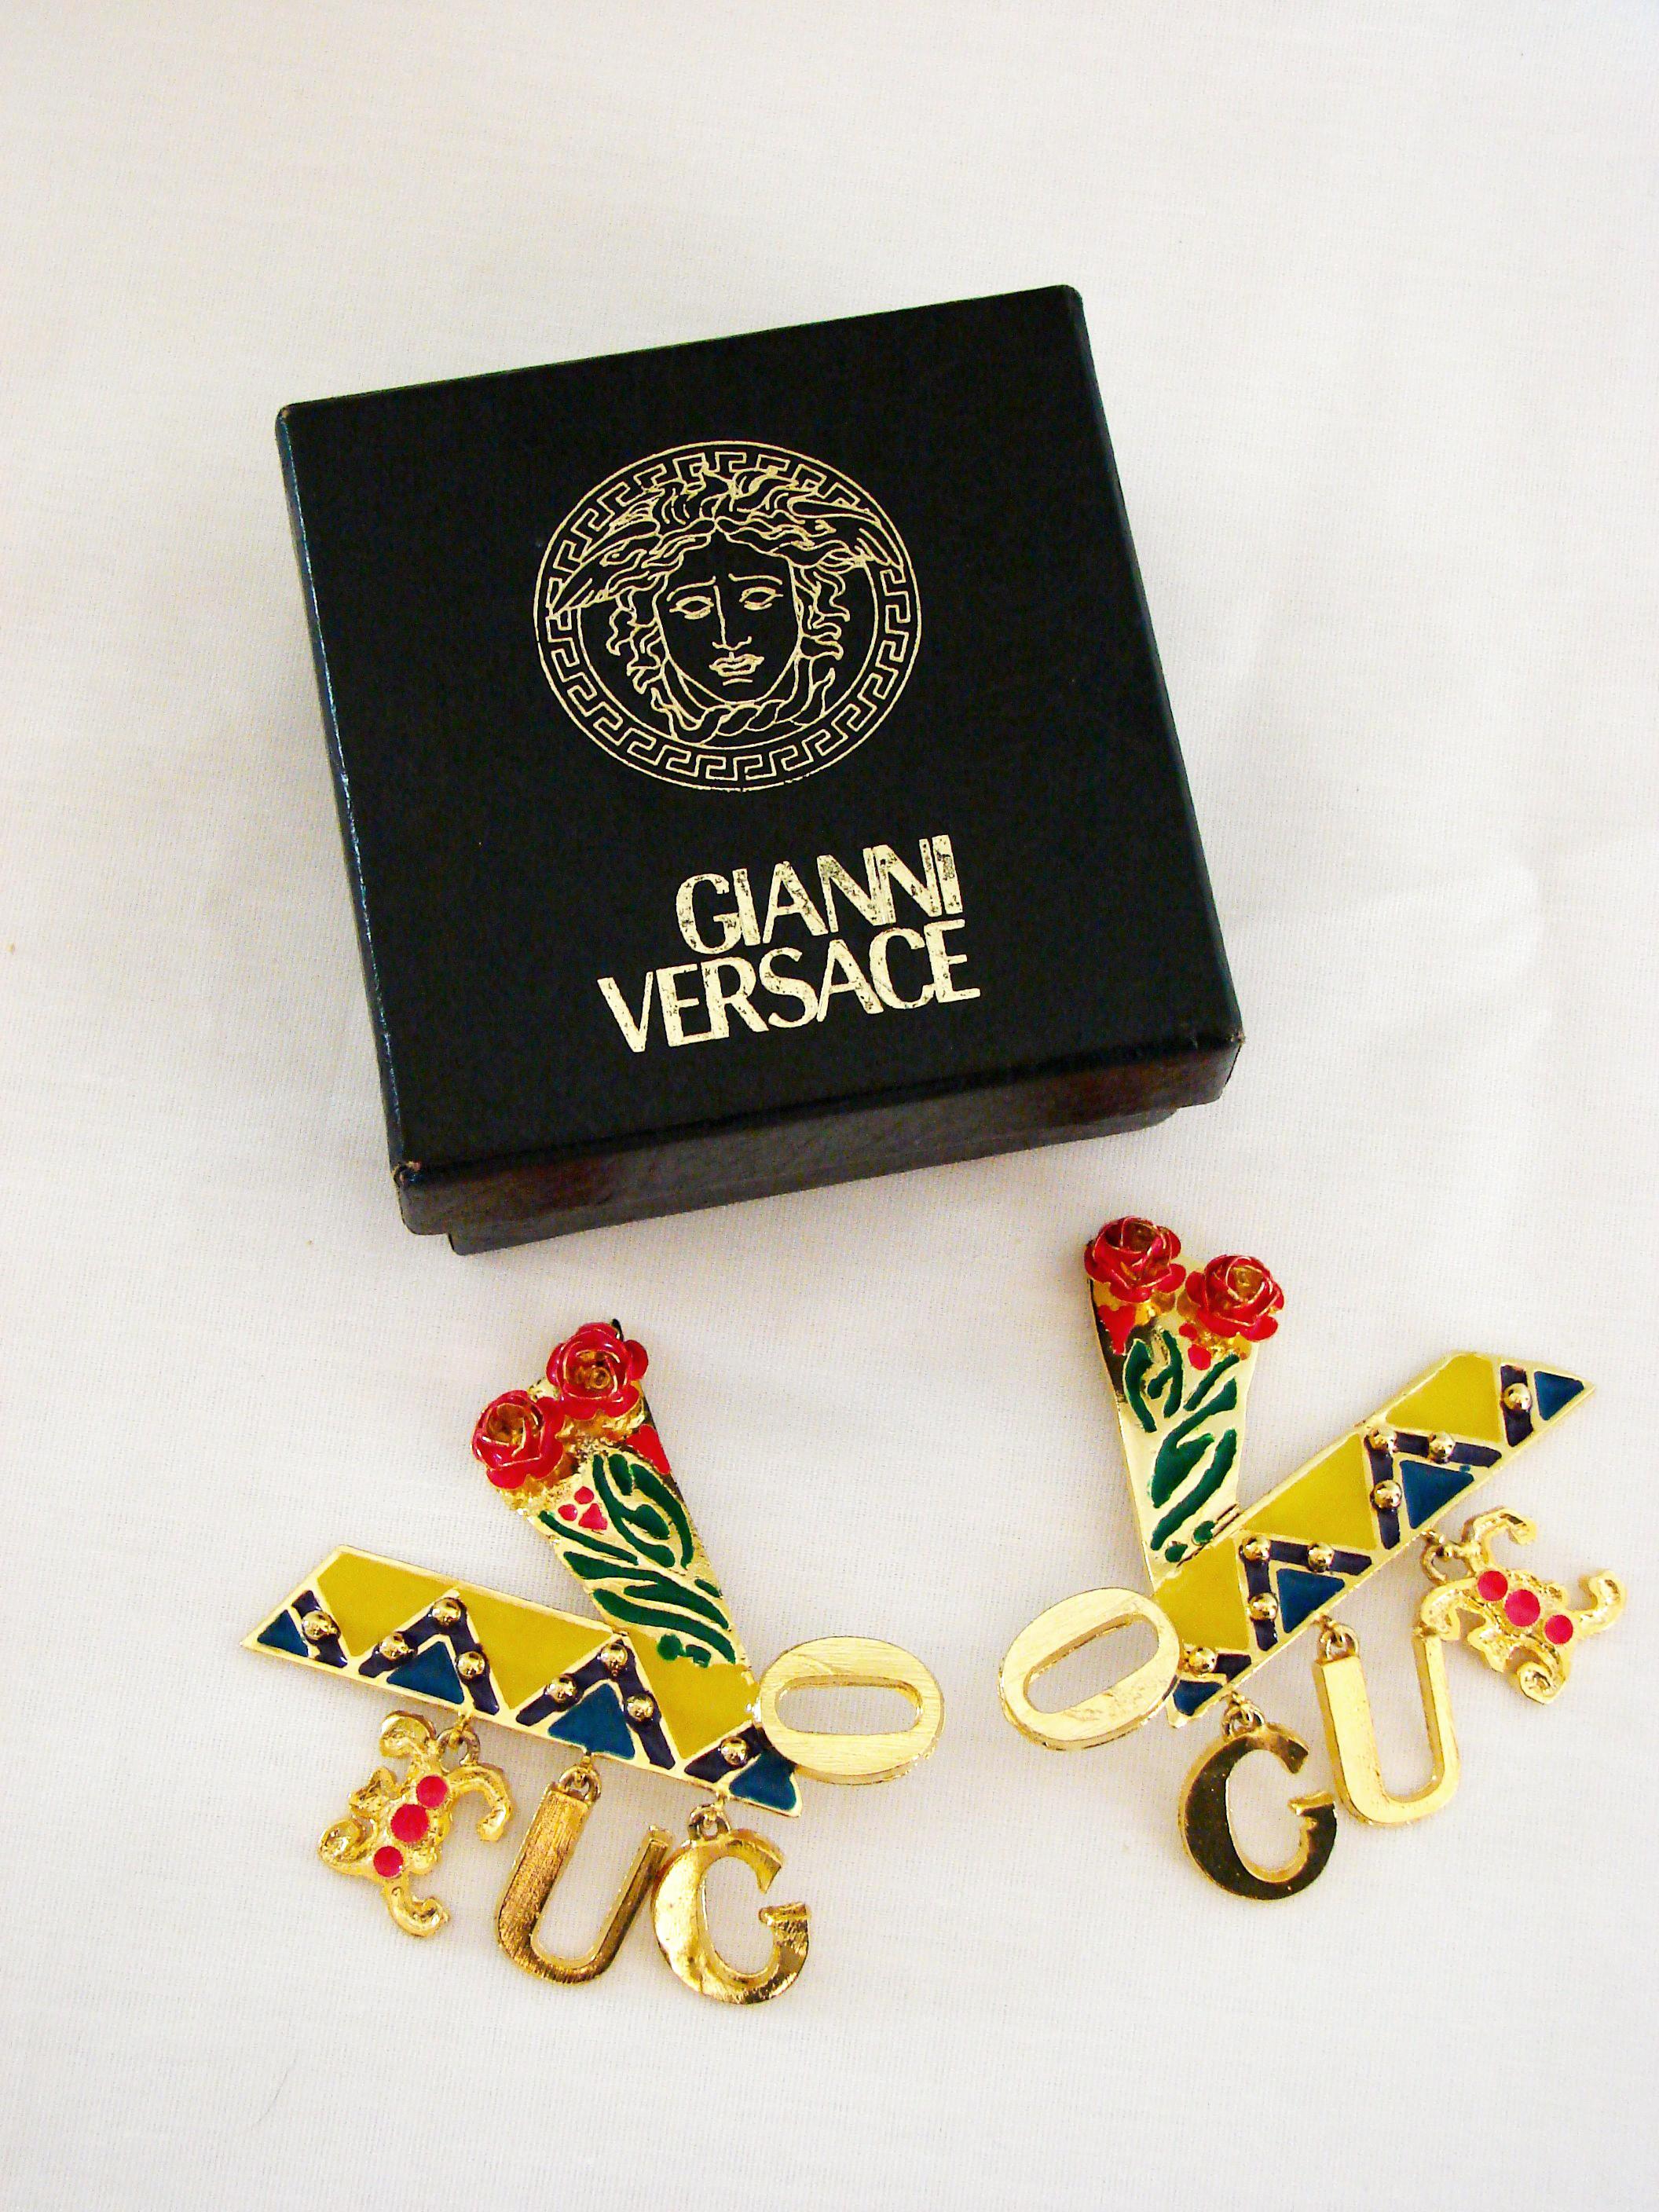 Massive gold earrings from Gianni Versace c1990 feature colorful enamel and rose details, and spell out the word 'Vogue' with dangling charm letters (very similar to the reboot version Donatella released at Milan Fashion week, sported by Kaia